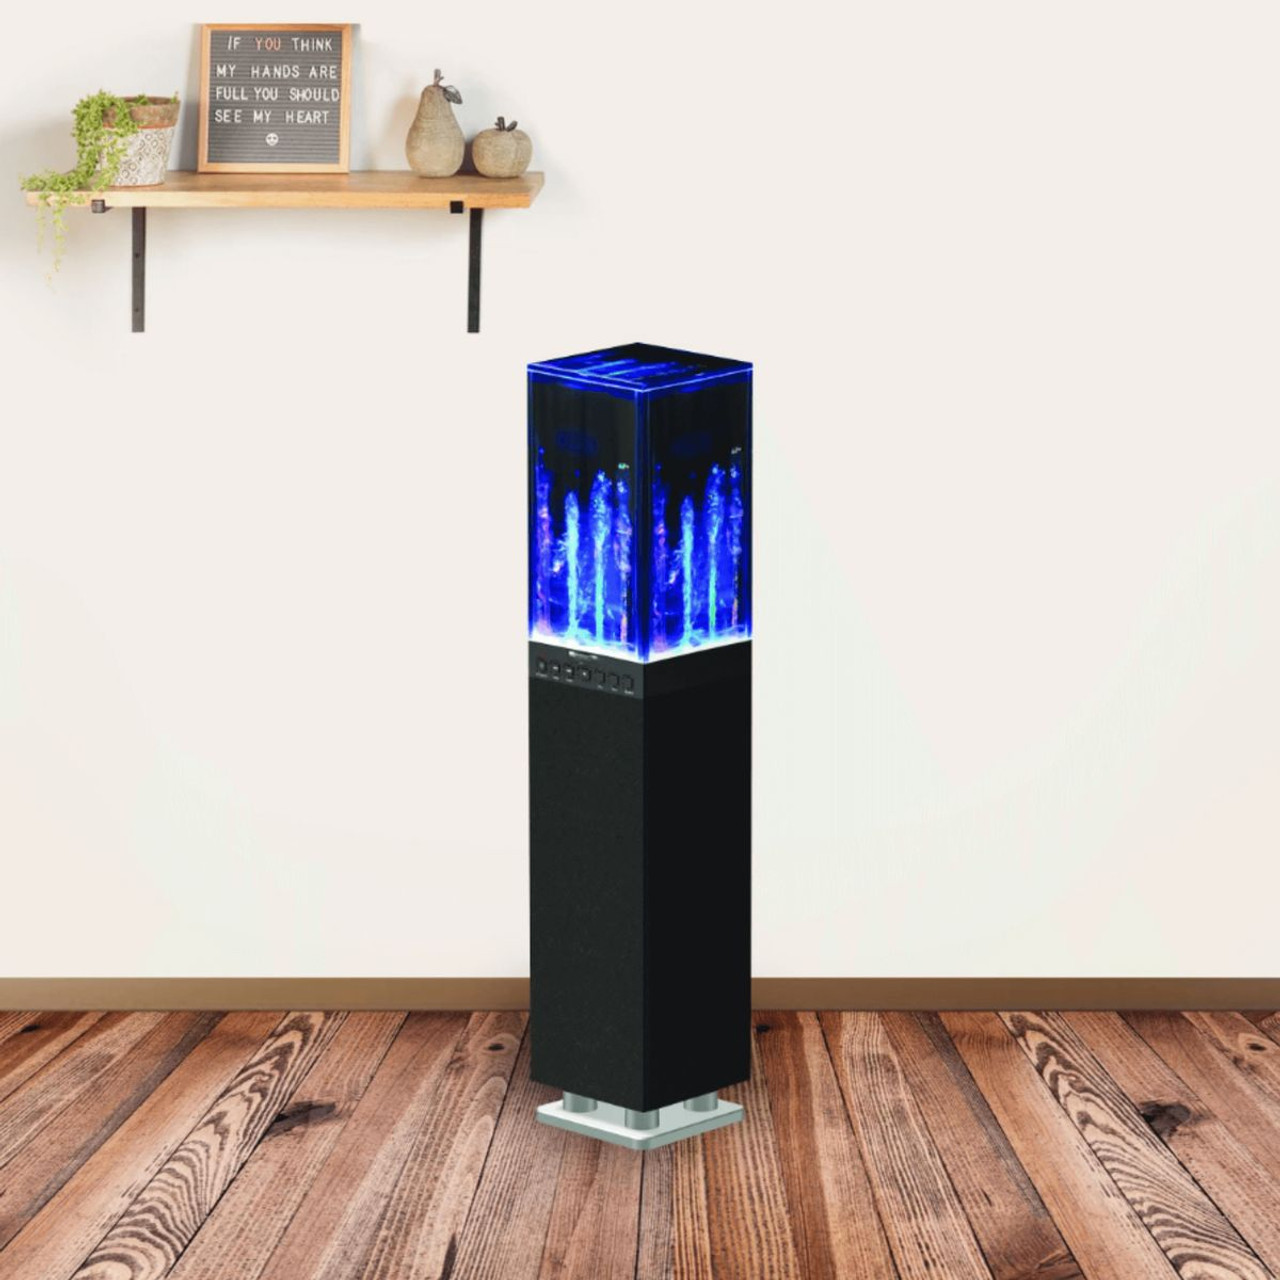 Dancing Water Light Tower Speaker System by Emerson™ product image